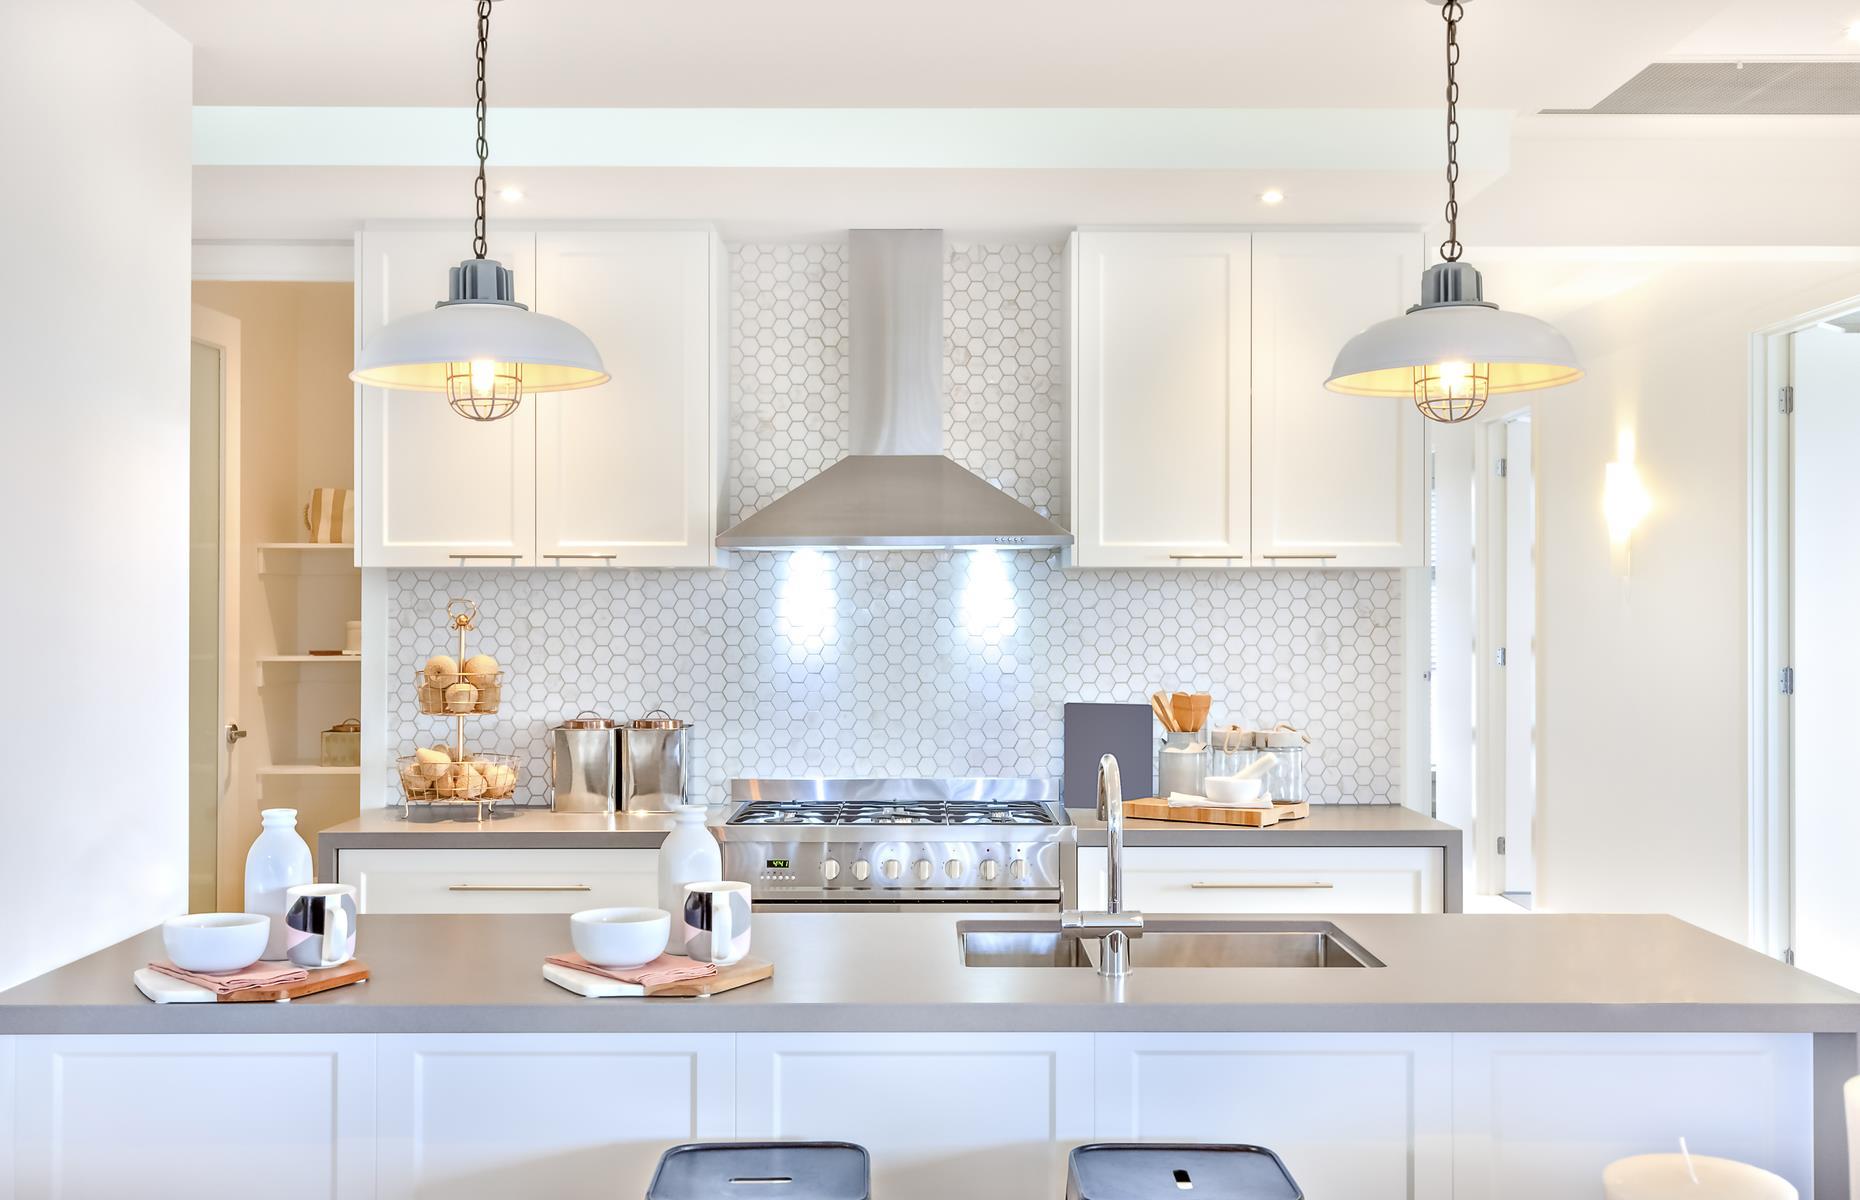 <p>It's wonderful to be able to cook and entertain simultaneously and an open-plan space allows you to do that with ease. What you don't want though is for the whole room to smell of whatever you're cooking, so it's important to equip your kitchen with a high-powered range hood to whisk all those odors away.</p>